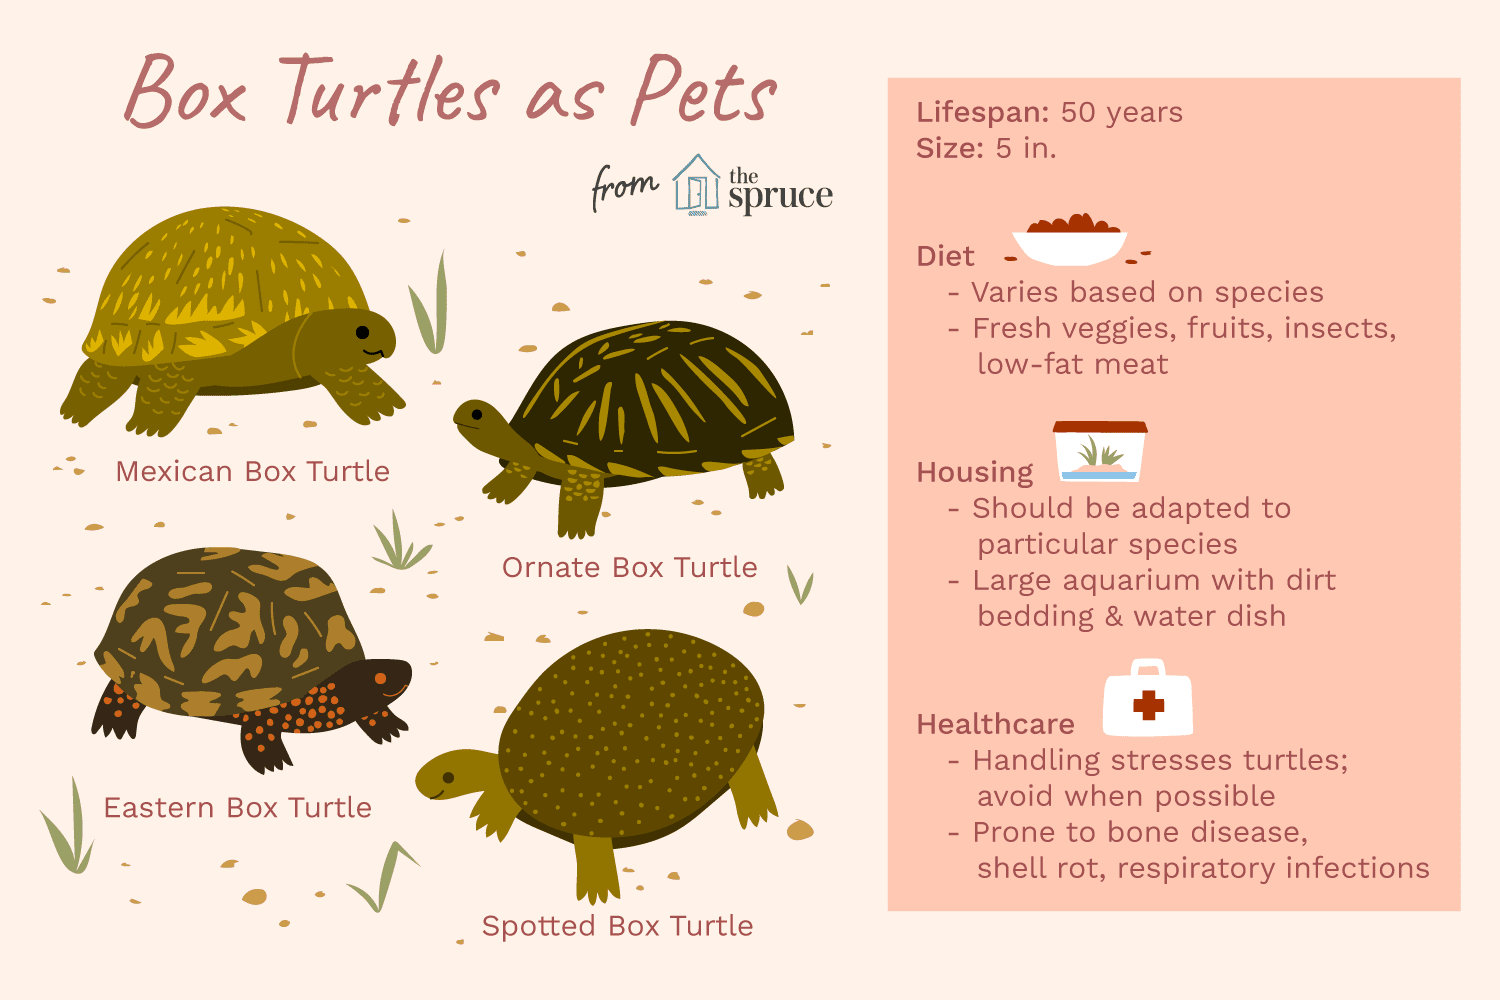 How to Care for a Box Turtle?